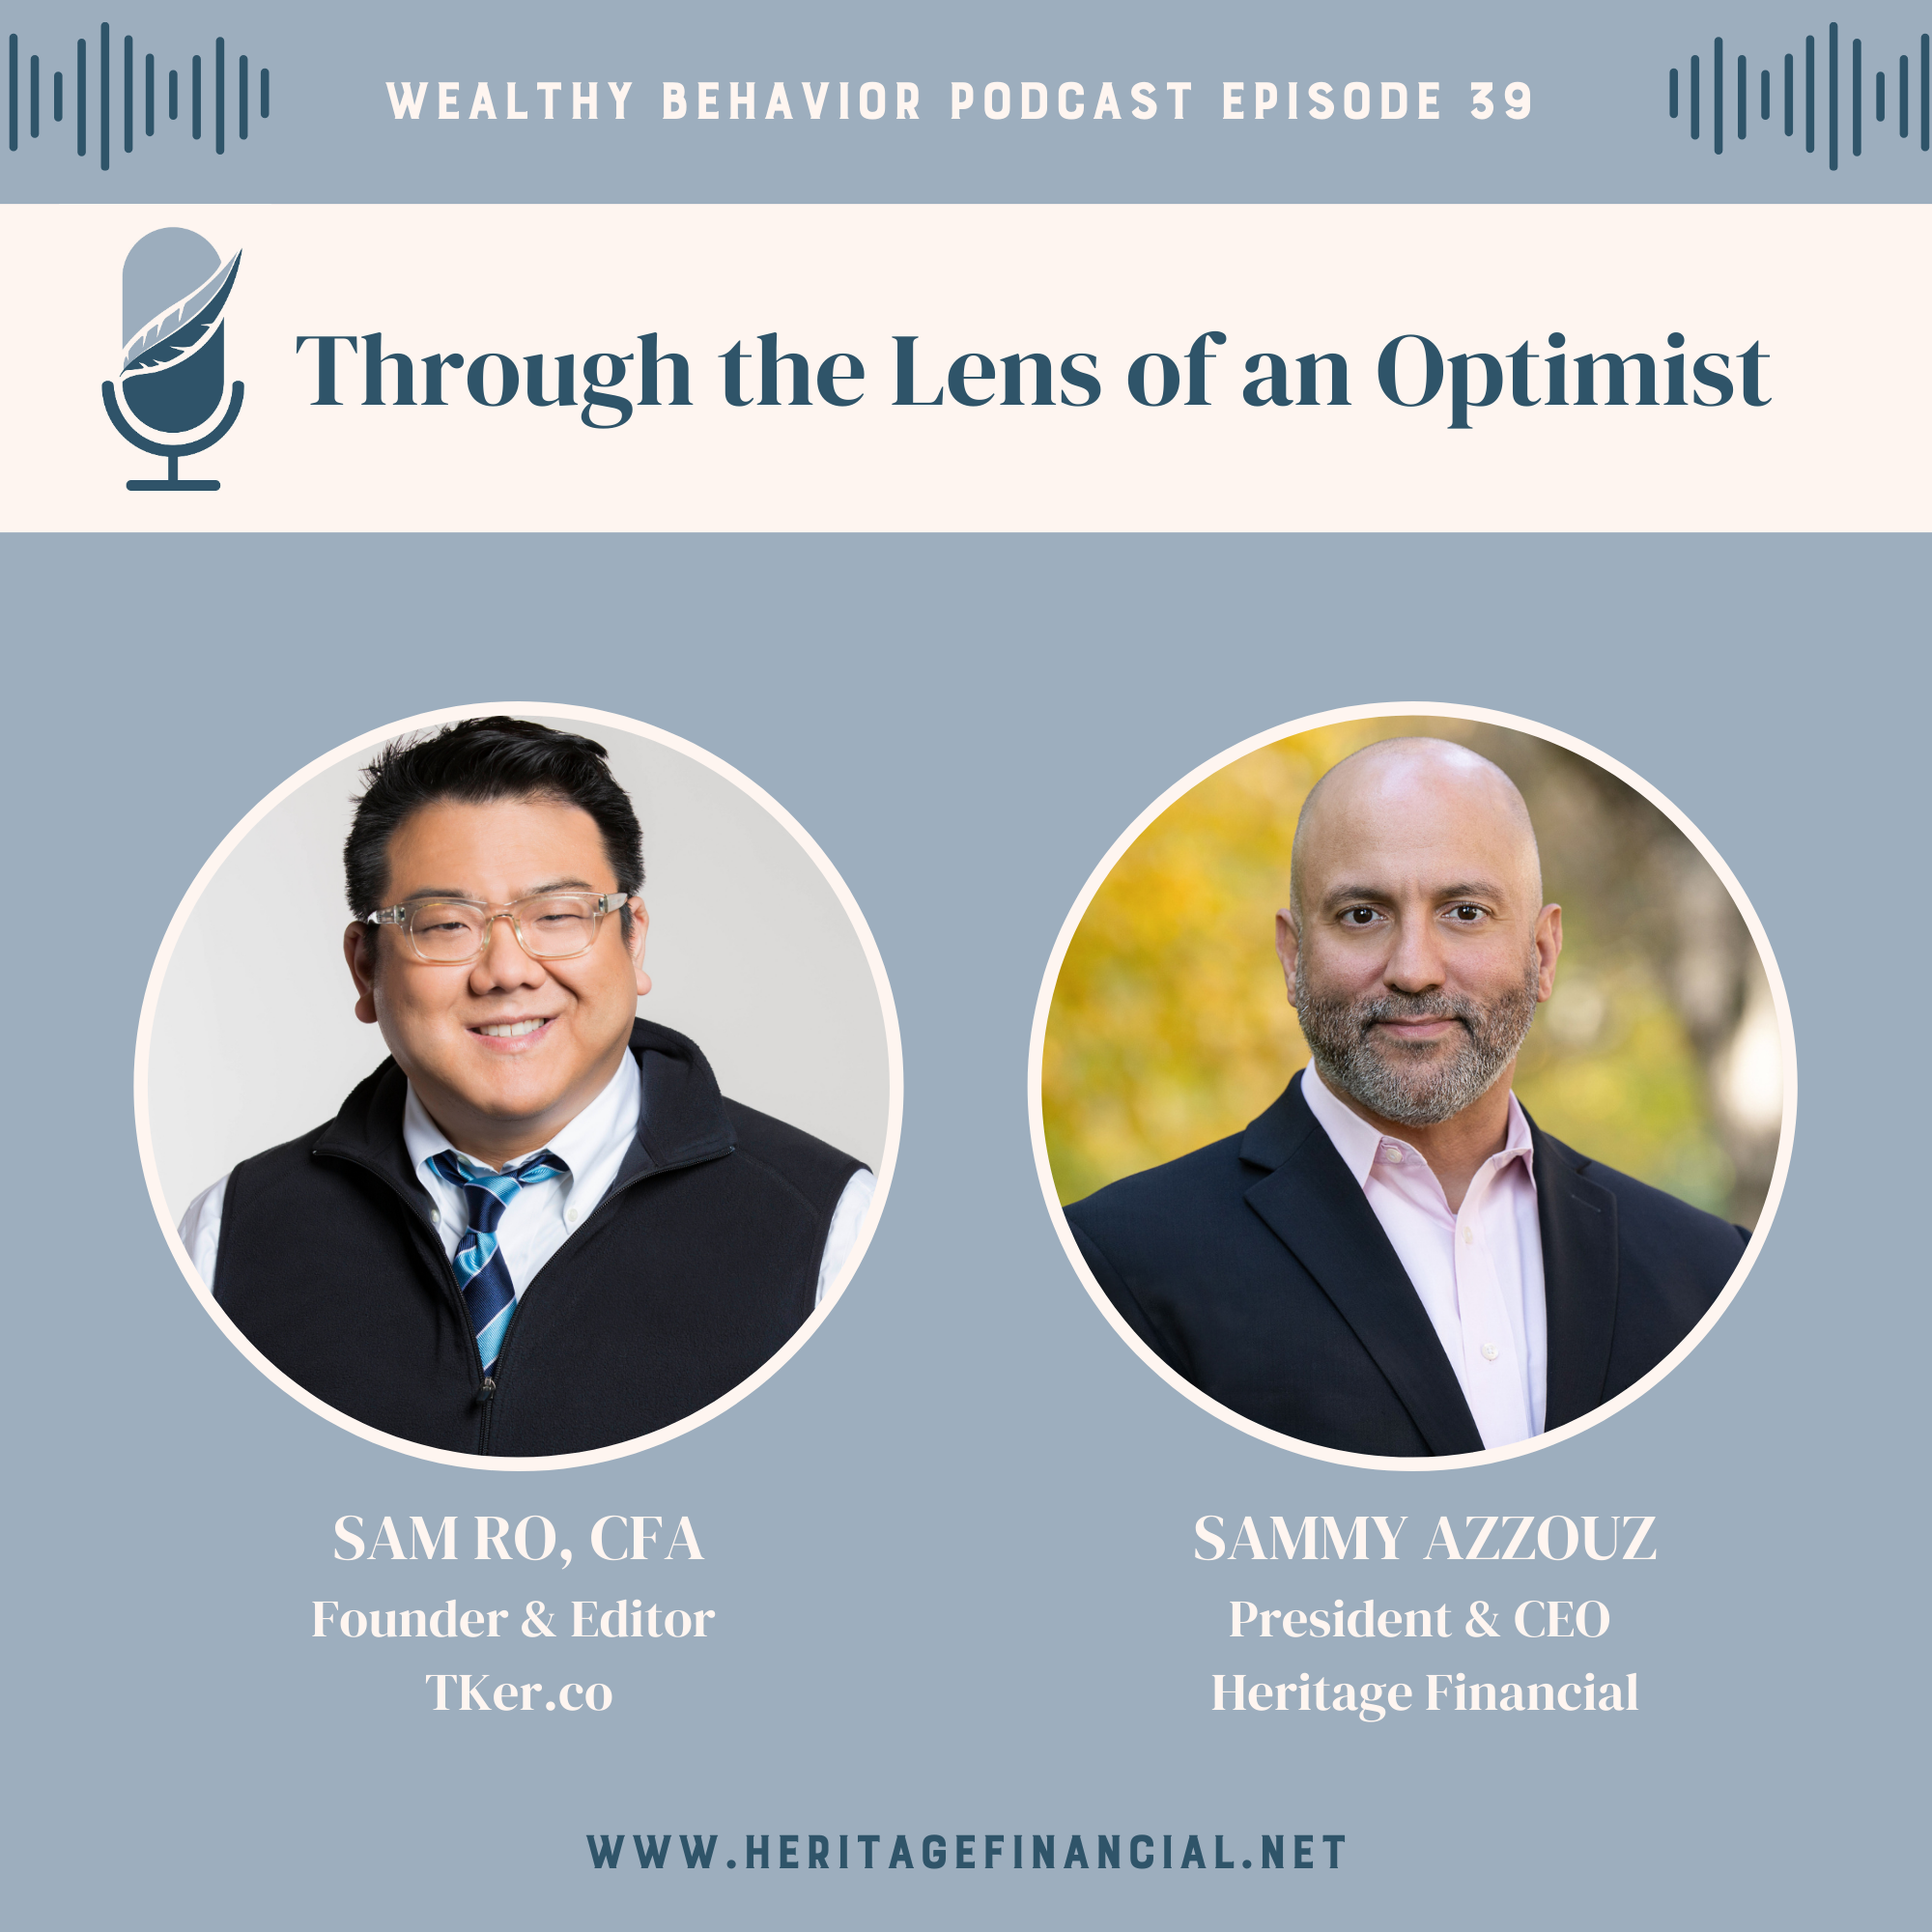 Wealthy Behavior podcast featuring Sam Ro